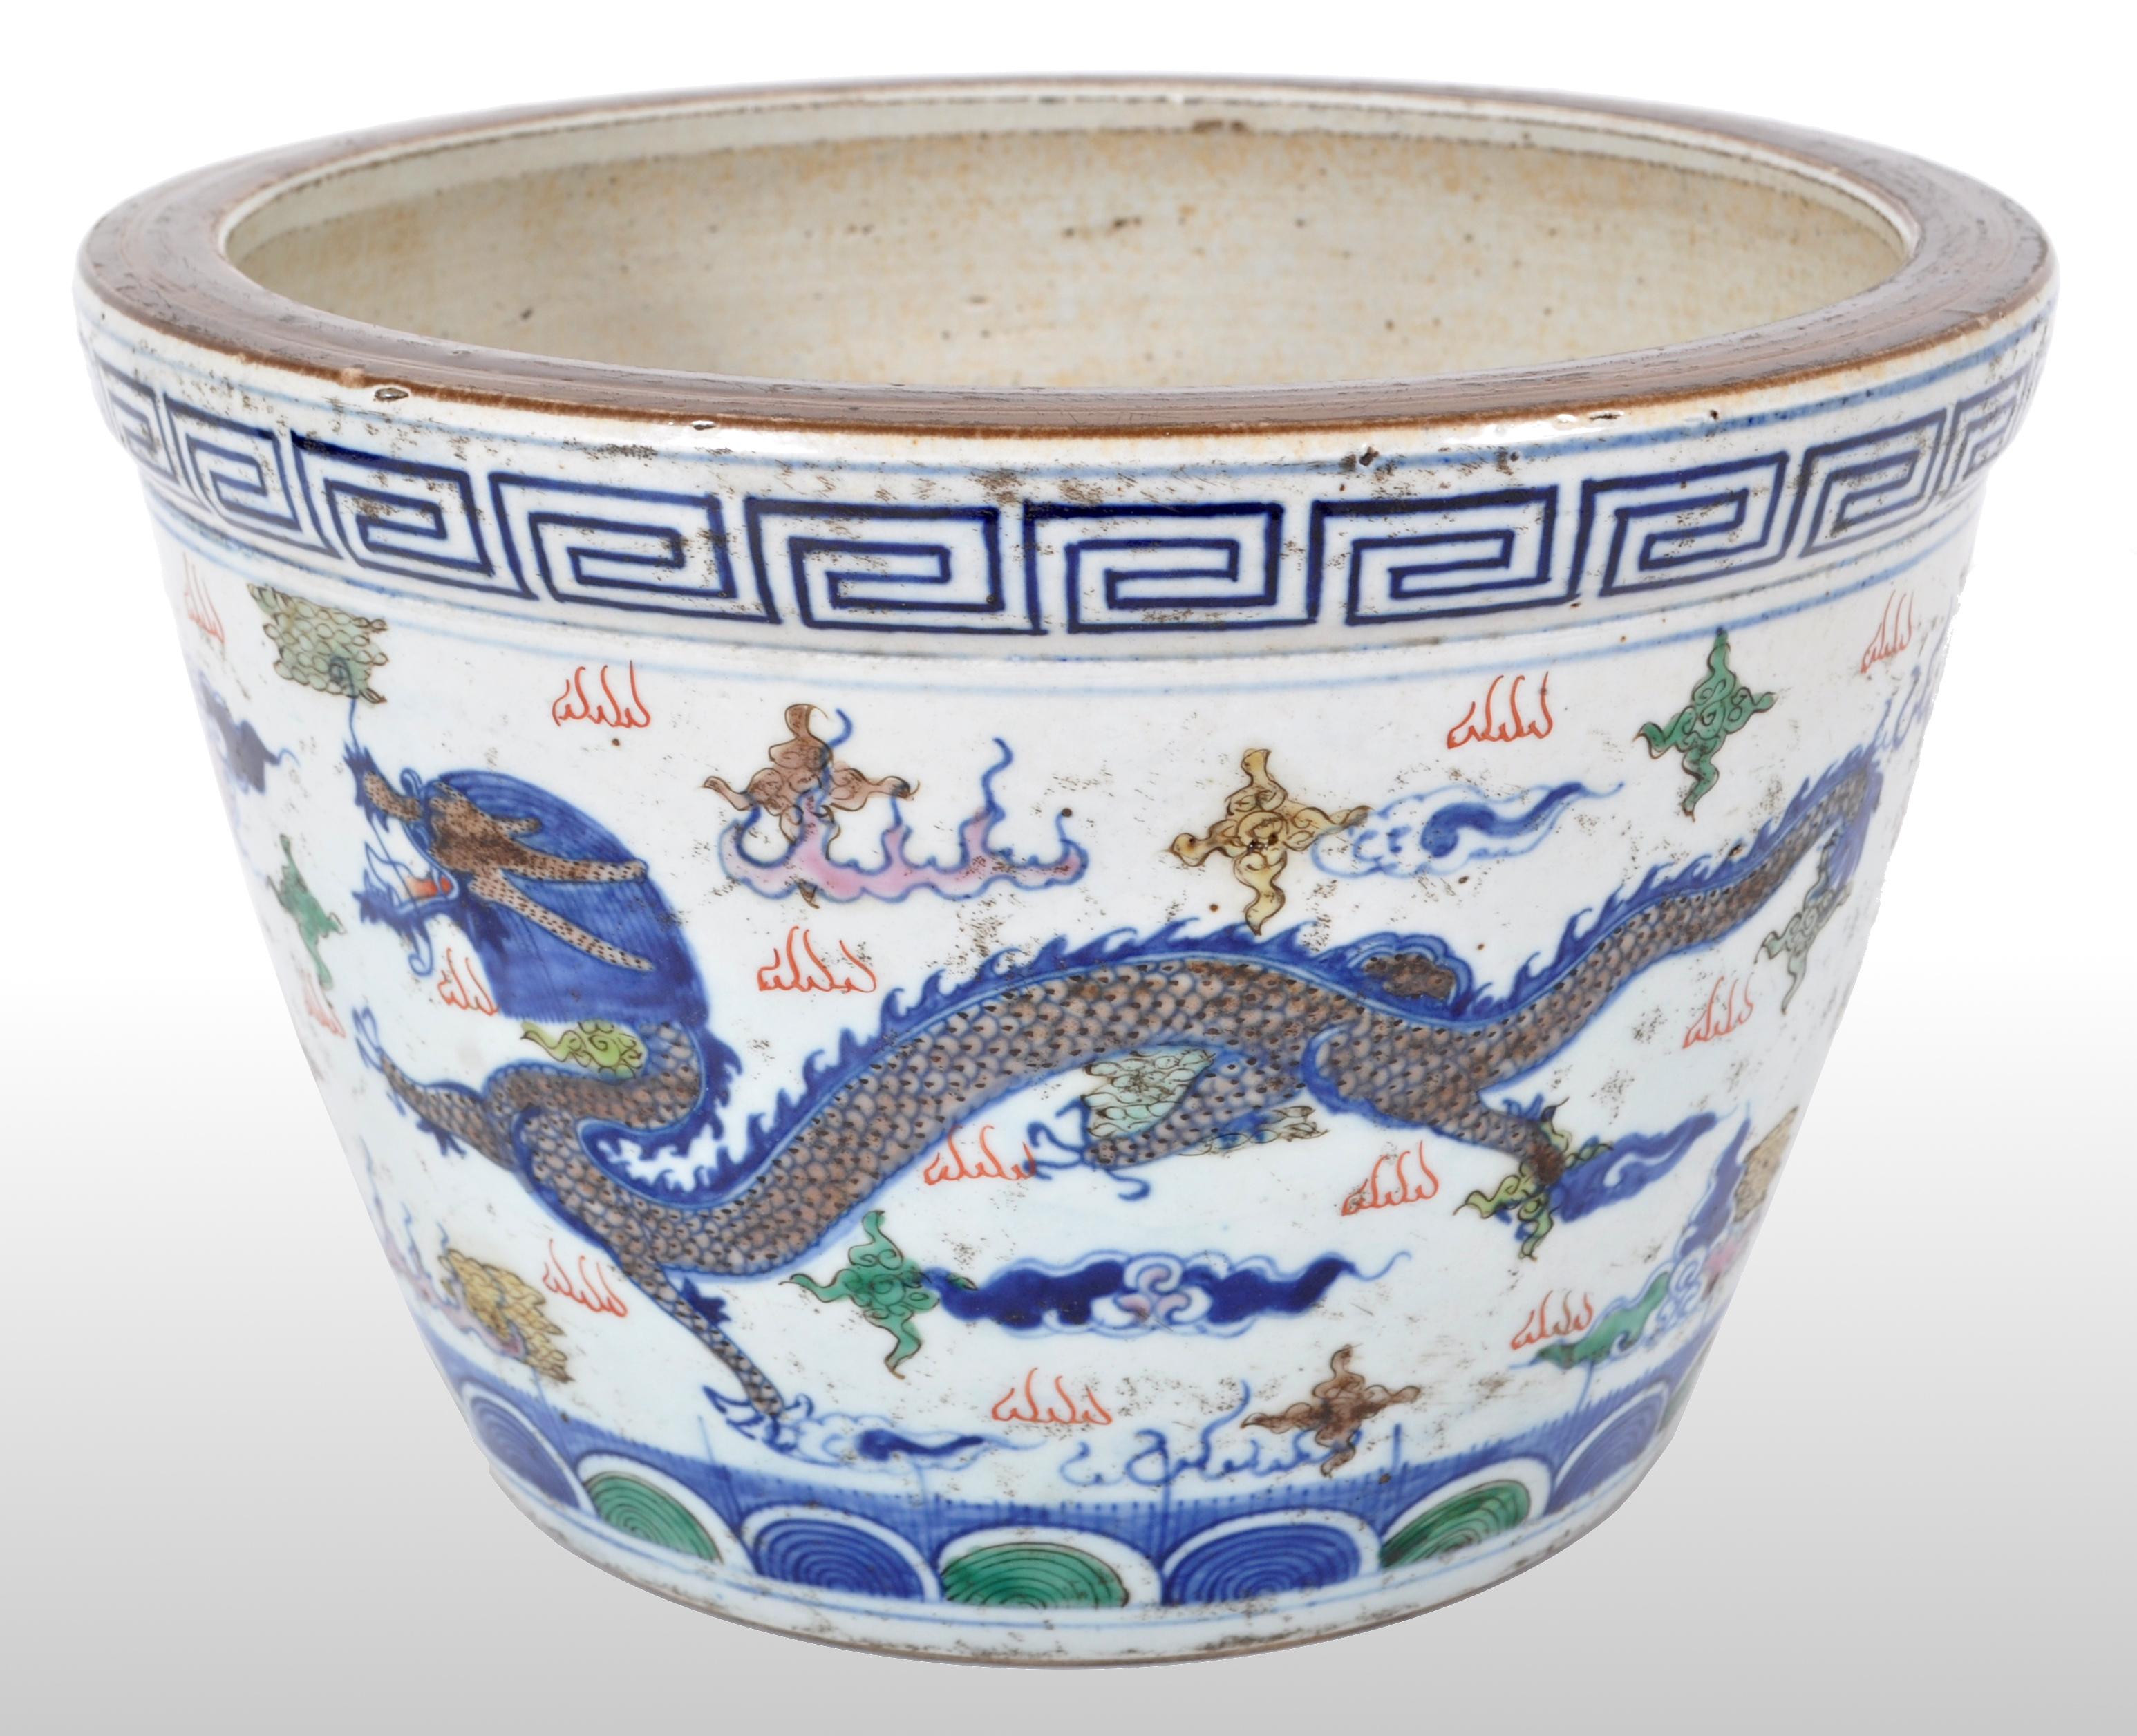 A good antique Chinese transitional porcelain Wucai (five colors) censer from the great kilns of Jingdezhen and dating from the reign of the Kangxi Emperor, (1662-1722). The censer is finely decorated with a pair of dragons chasing a flaming pearl